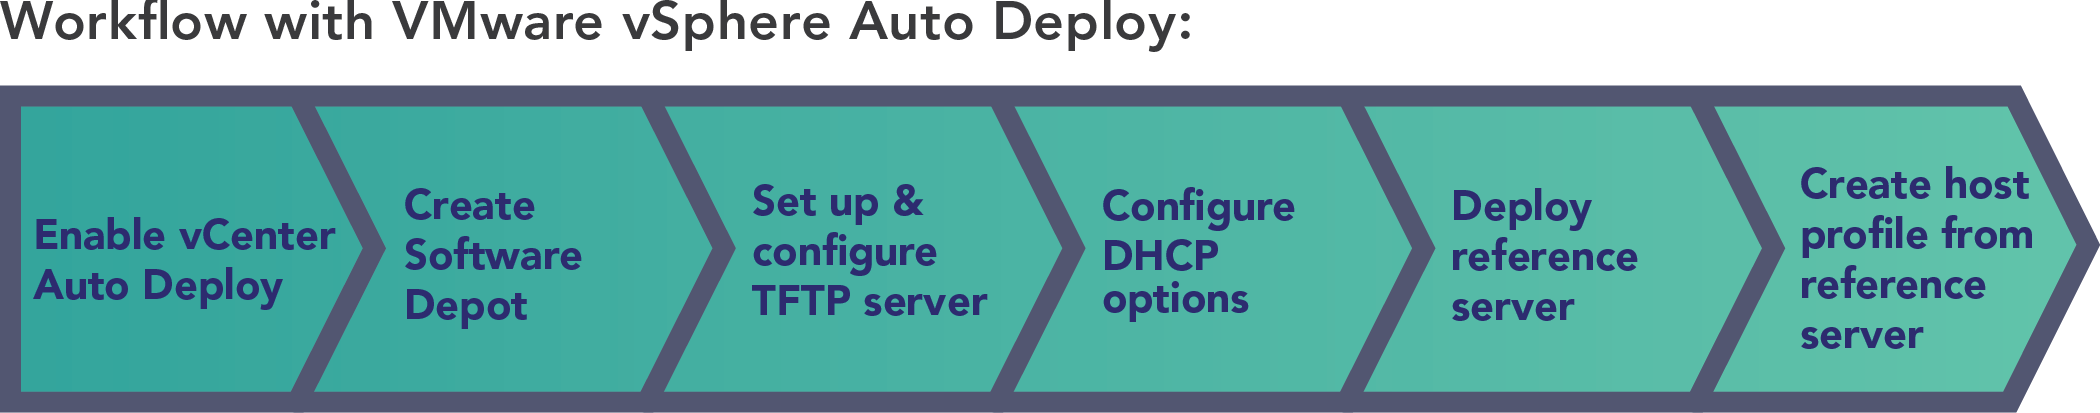 Diagram showing the six high-level steps necessary to perform one-time setup and configuration of servers using VMware vSphere Auto Deploy. The steps are “Enable vCenter Auto Deploy,” “Create Software Depot,” “Set up & configure TFTP server,” “Configure DHCP options,” “Deploy reference server,” and “Create host profile from reference server.”